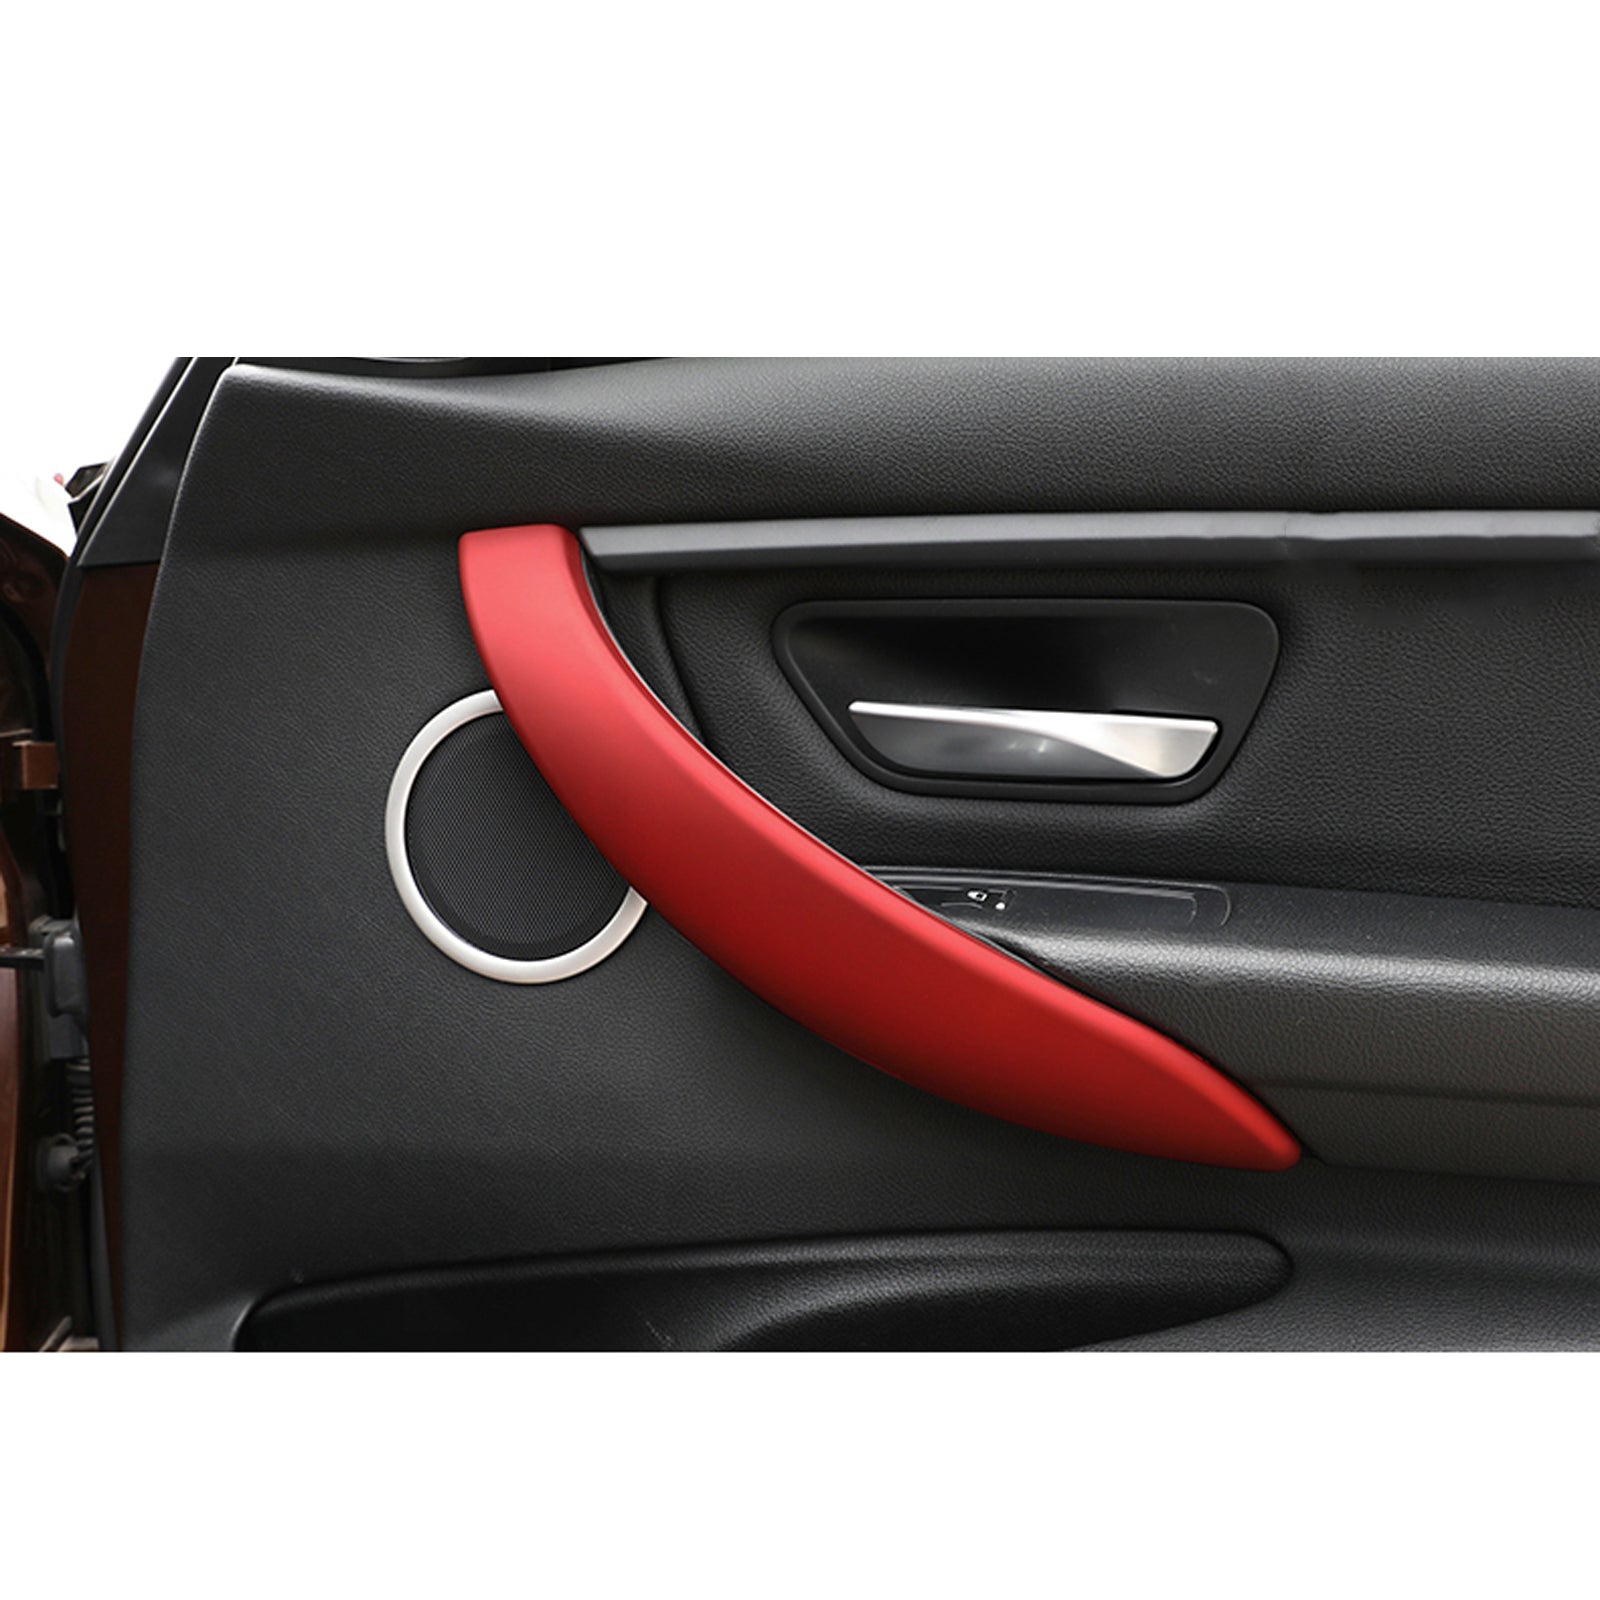 BMW F21 F22 F23 2012 2019 ABS Trim Alcantara Wrap For Interior Red Front  Door Armrest Panel Cover 1 Series Accessory From King128, $68.35